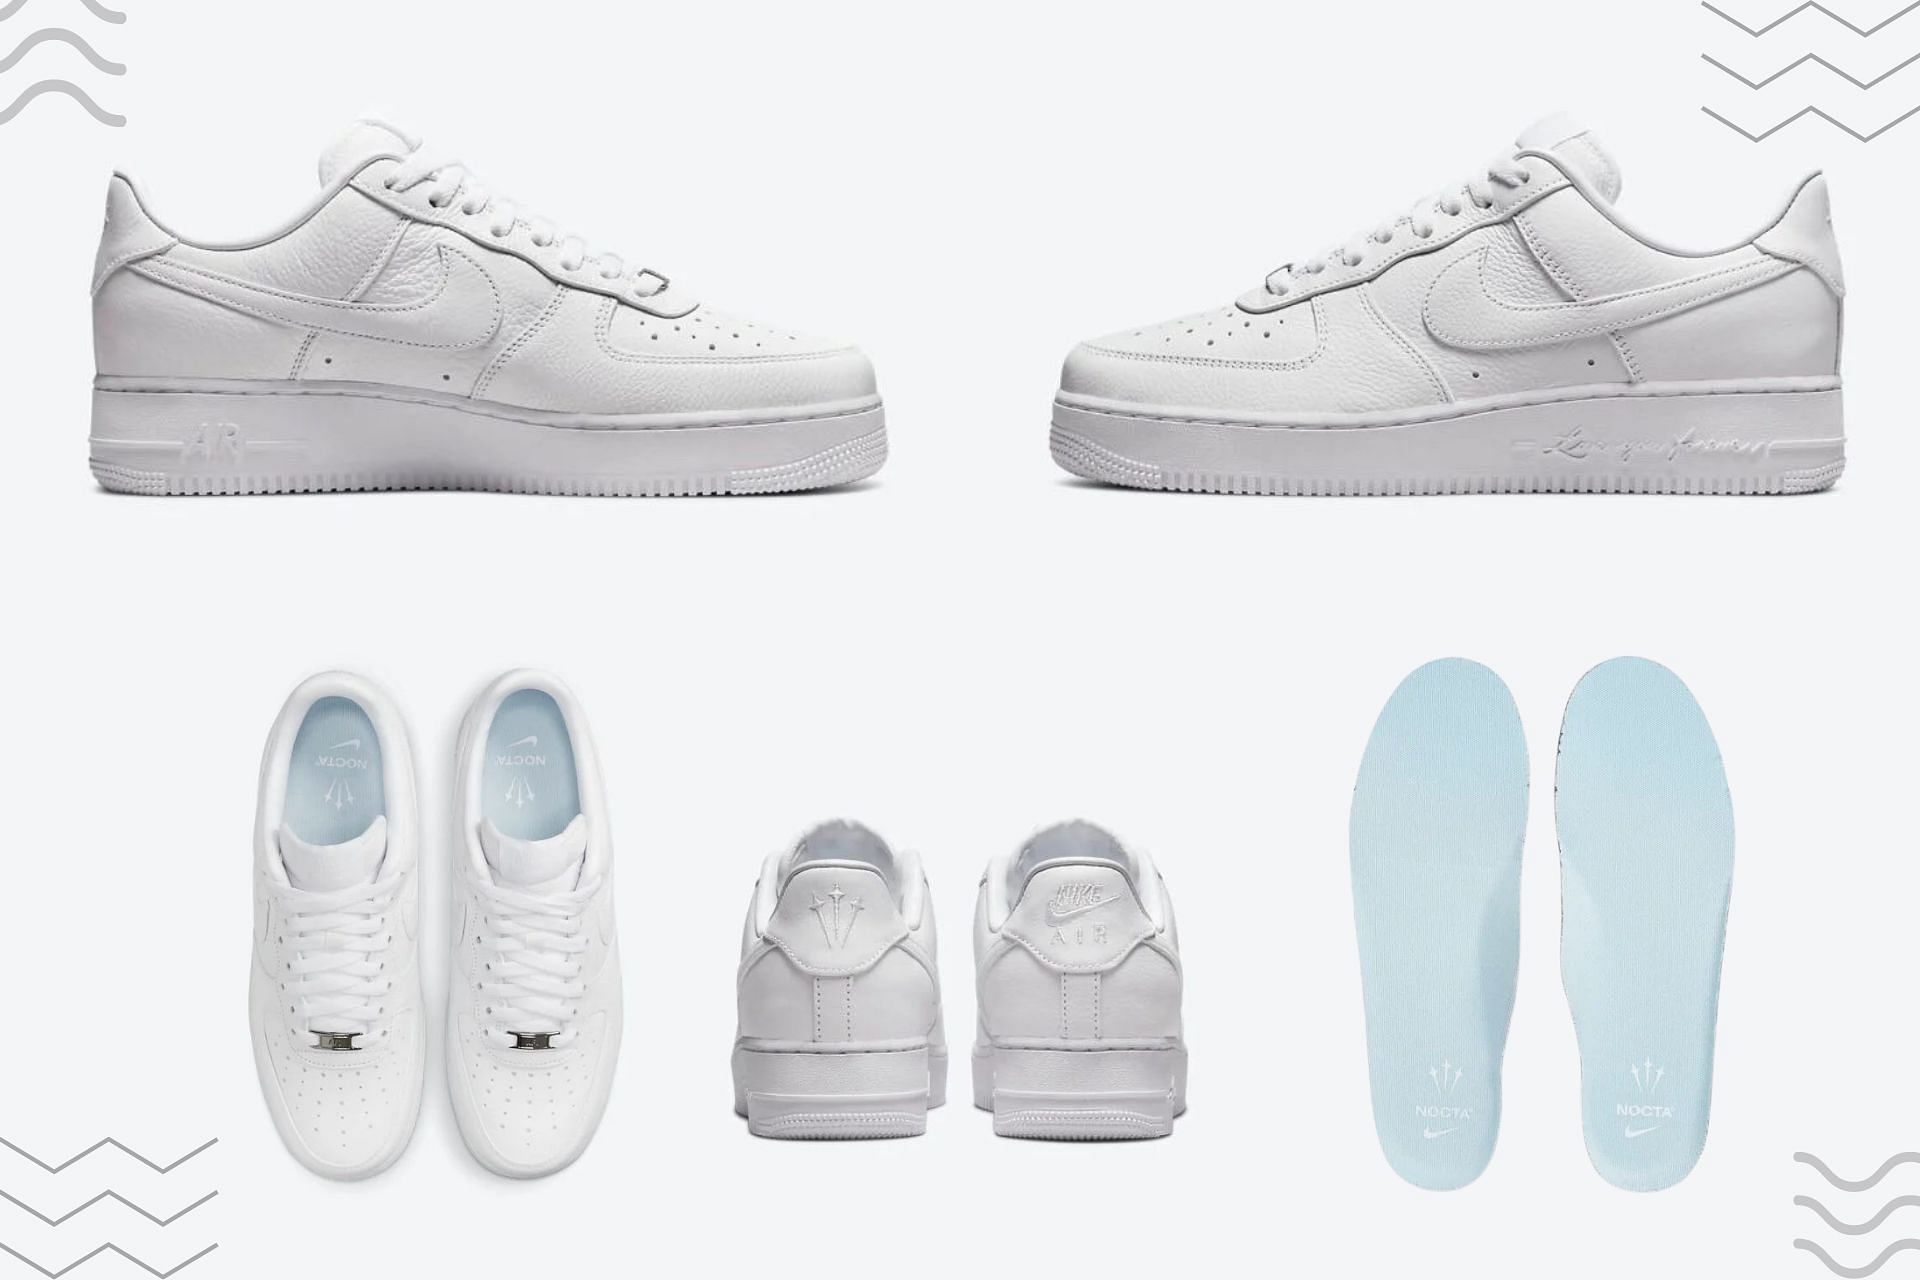 Where to buy Drake's NOCTA x Nike Air Force 1 Low “Certified Lover